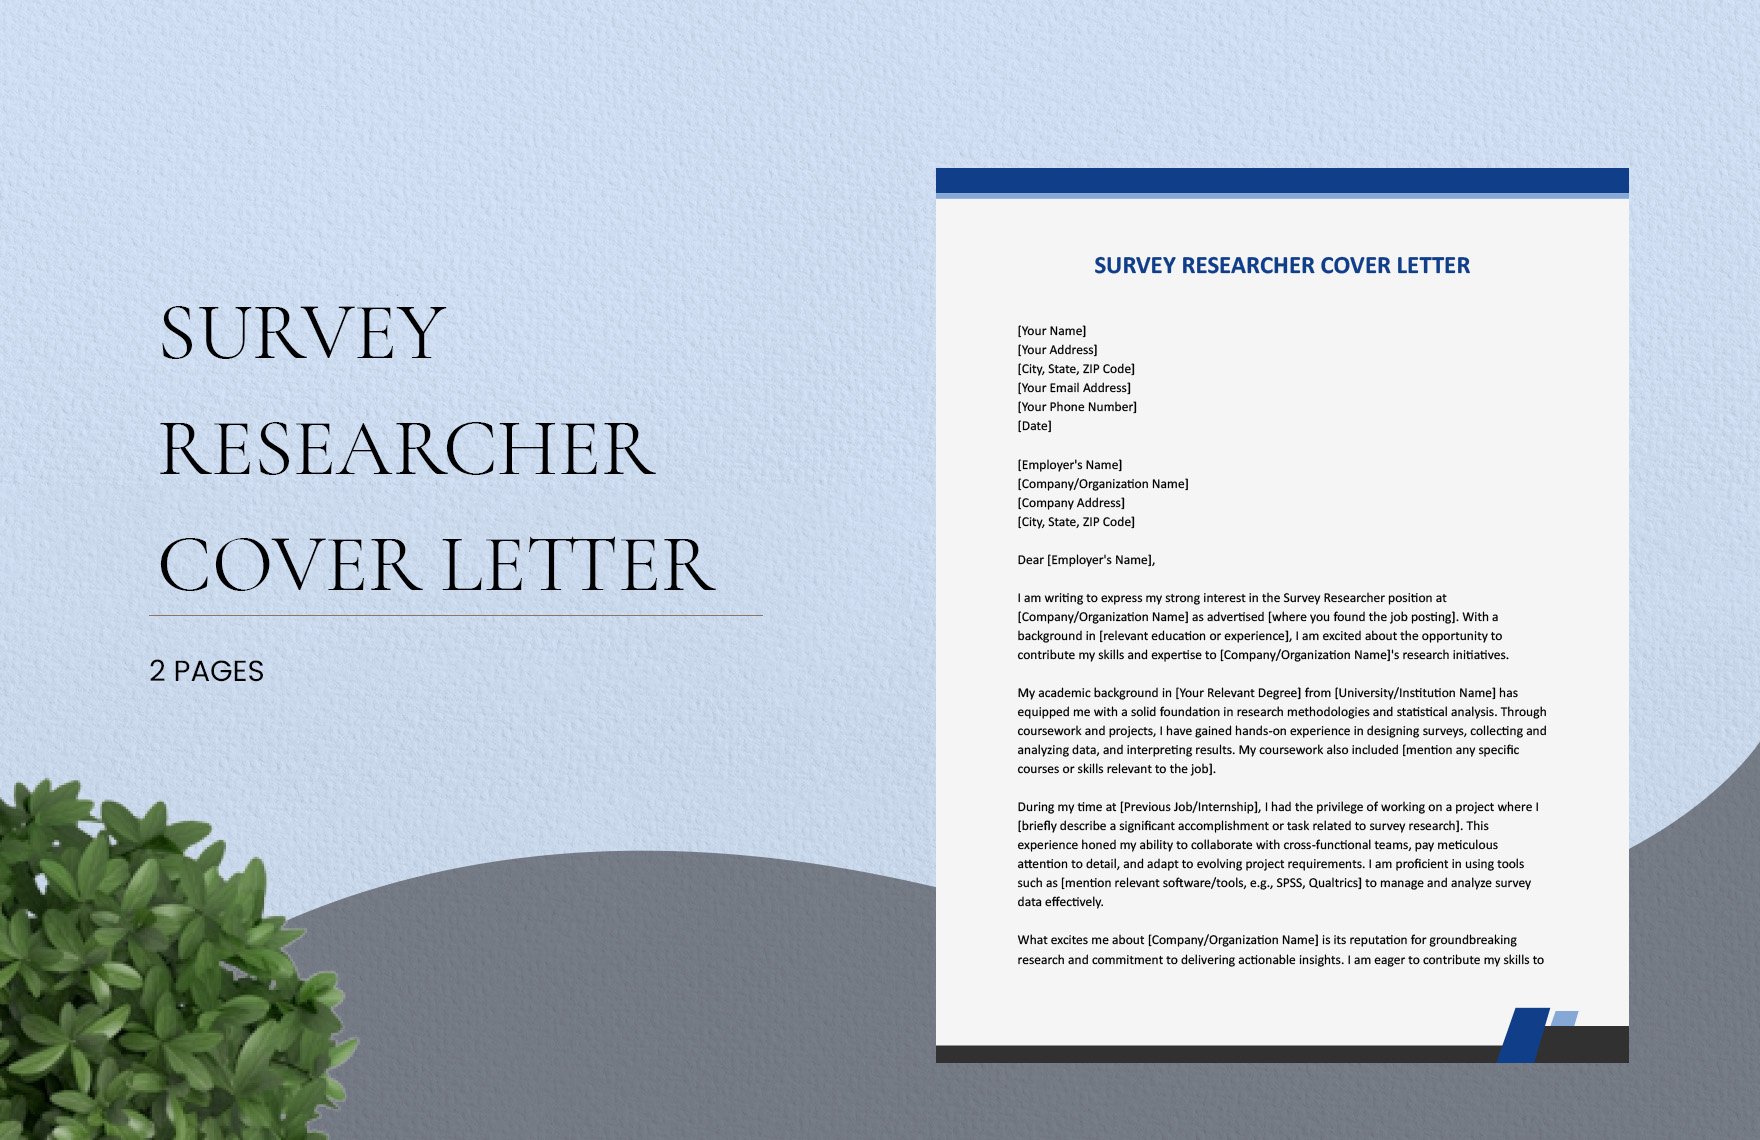 Survey Researcher Cover Letter in Word, Google Docs